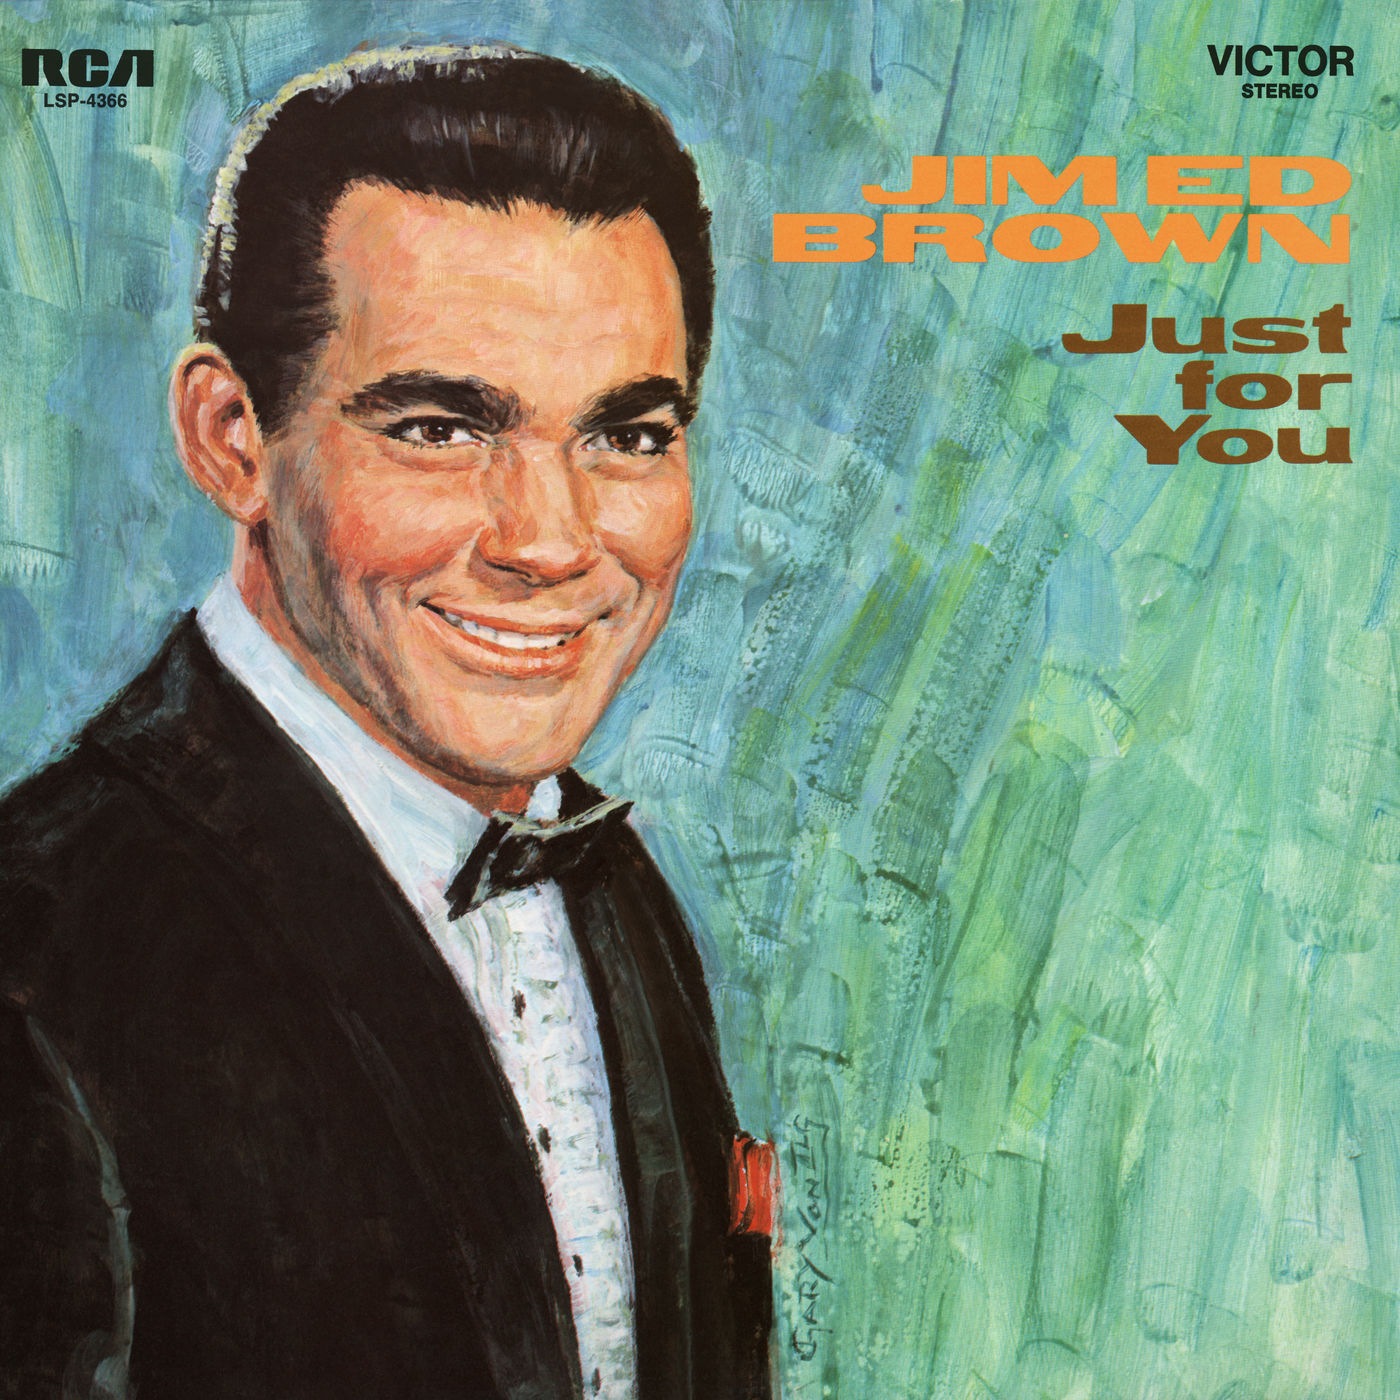 Jim Ed Brown - Just For You (1970/2020) [FLAC 24bit/96kHz]